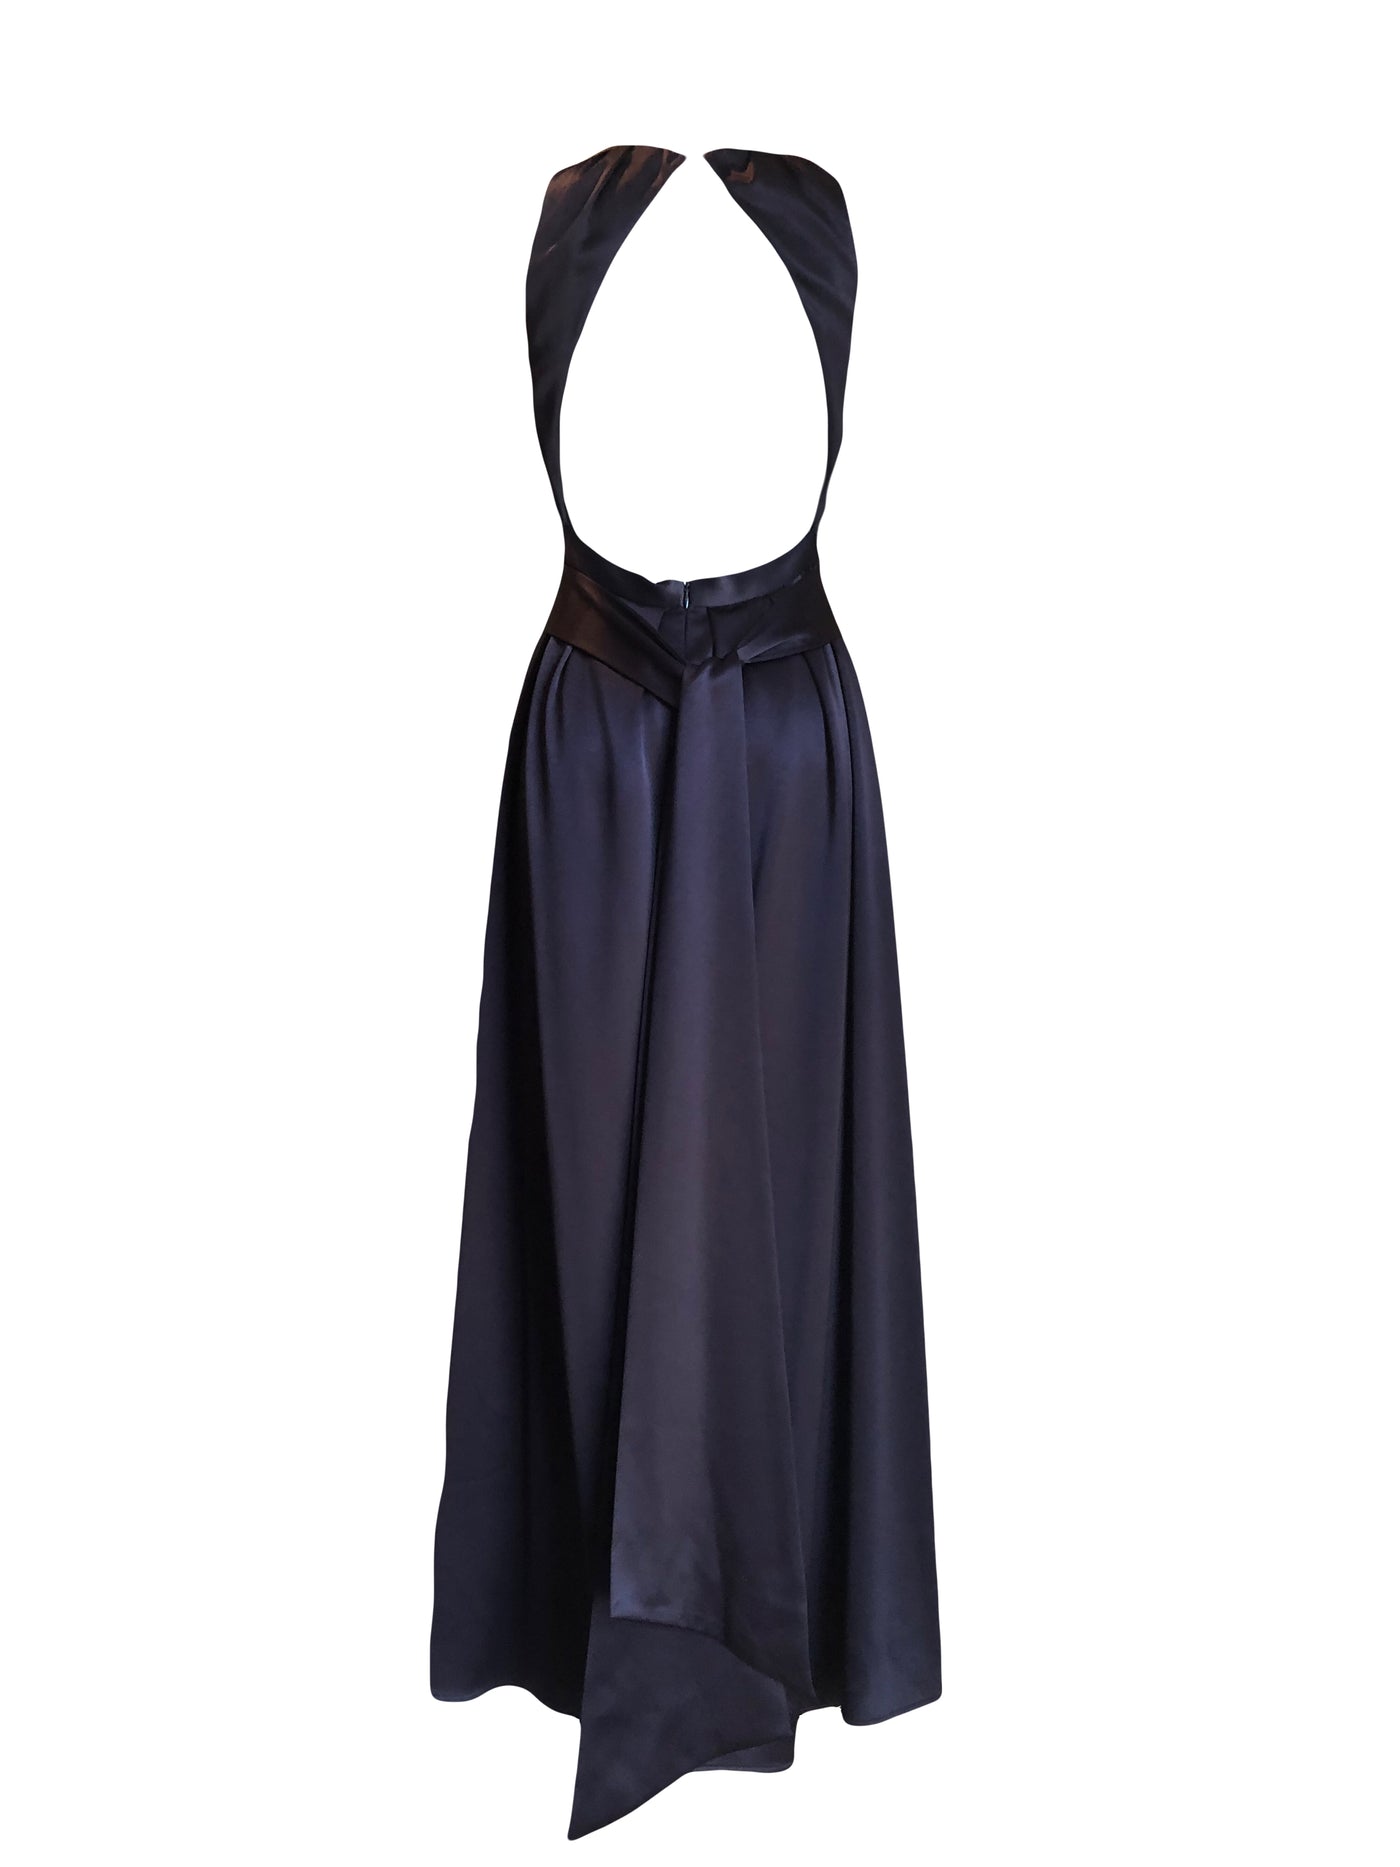 CELINE Midnight Blue Gown With Open Back